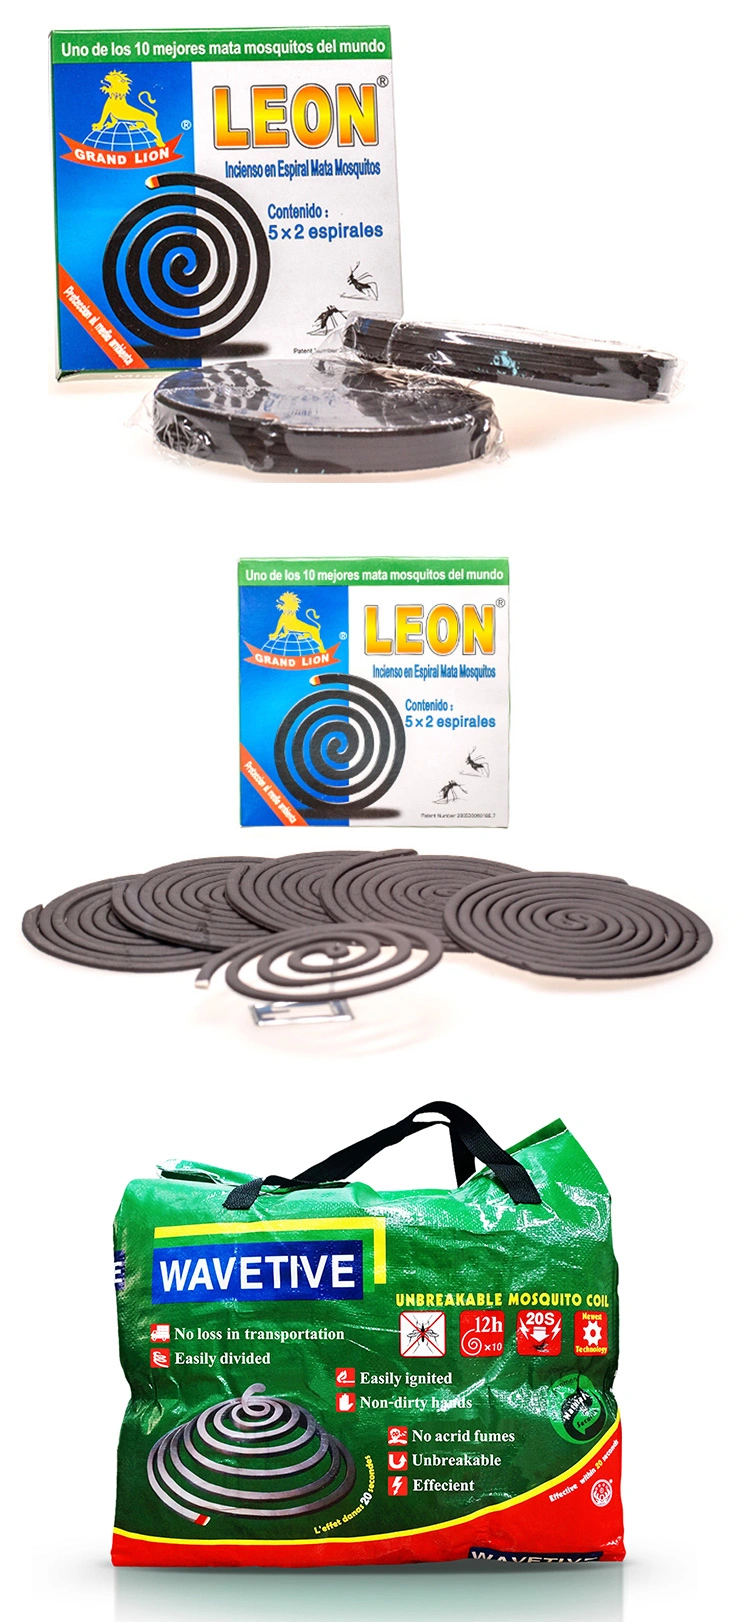 Smokeless Pest Reject Coil Mosquito Coil